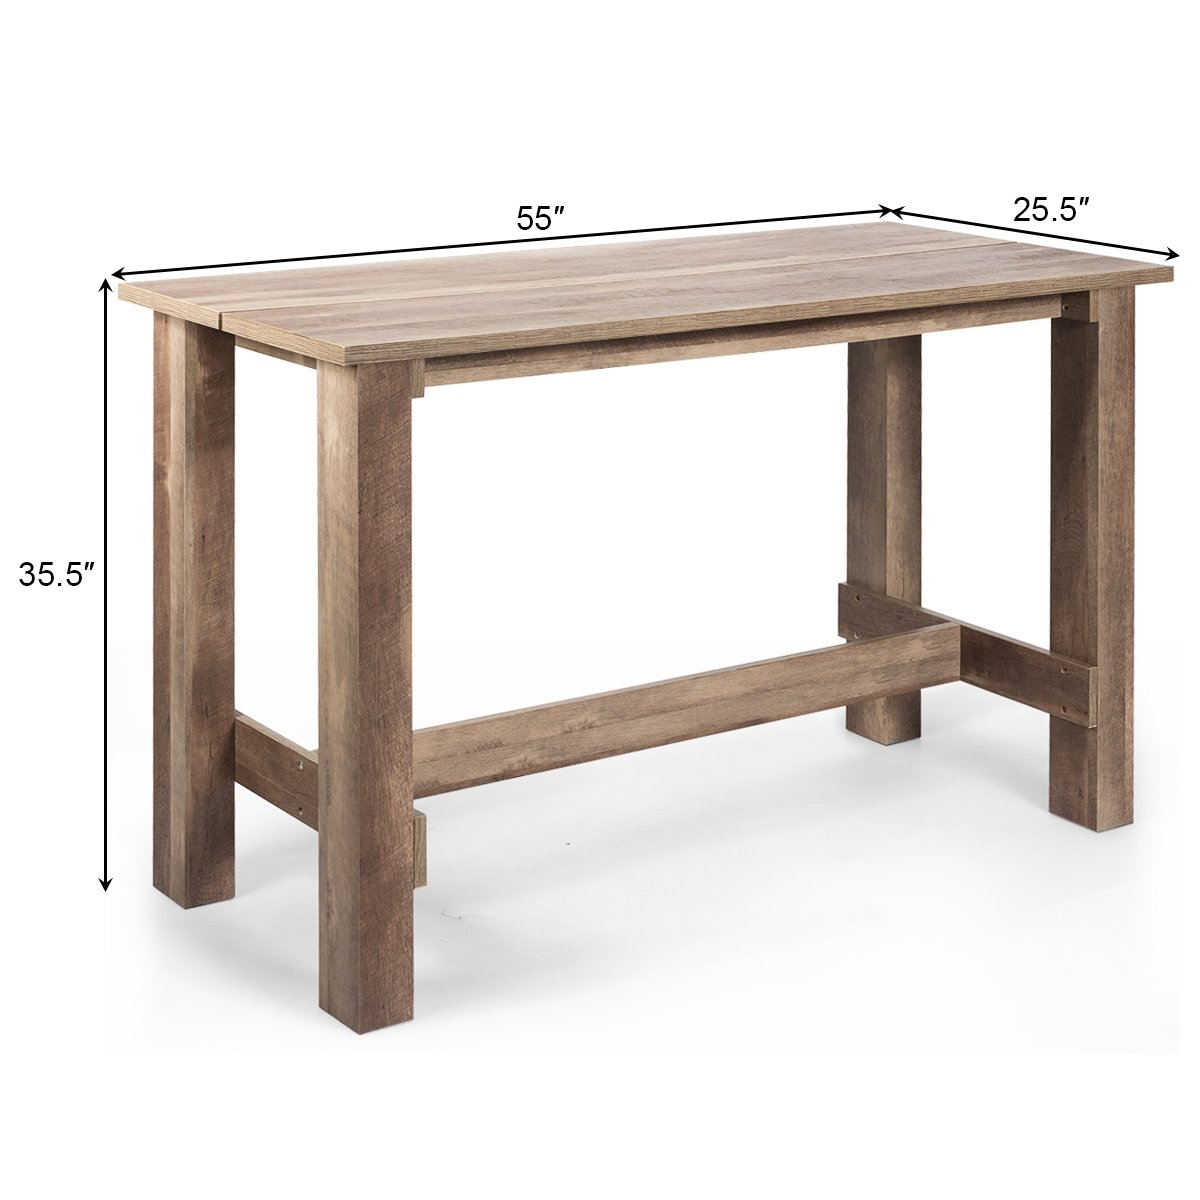 Multifunctional Counter Height Dining Table for Dining Room and Kitchen, Brown